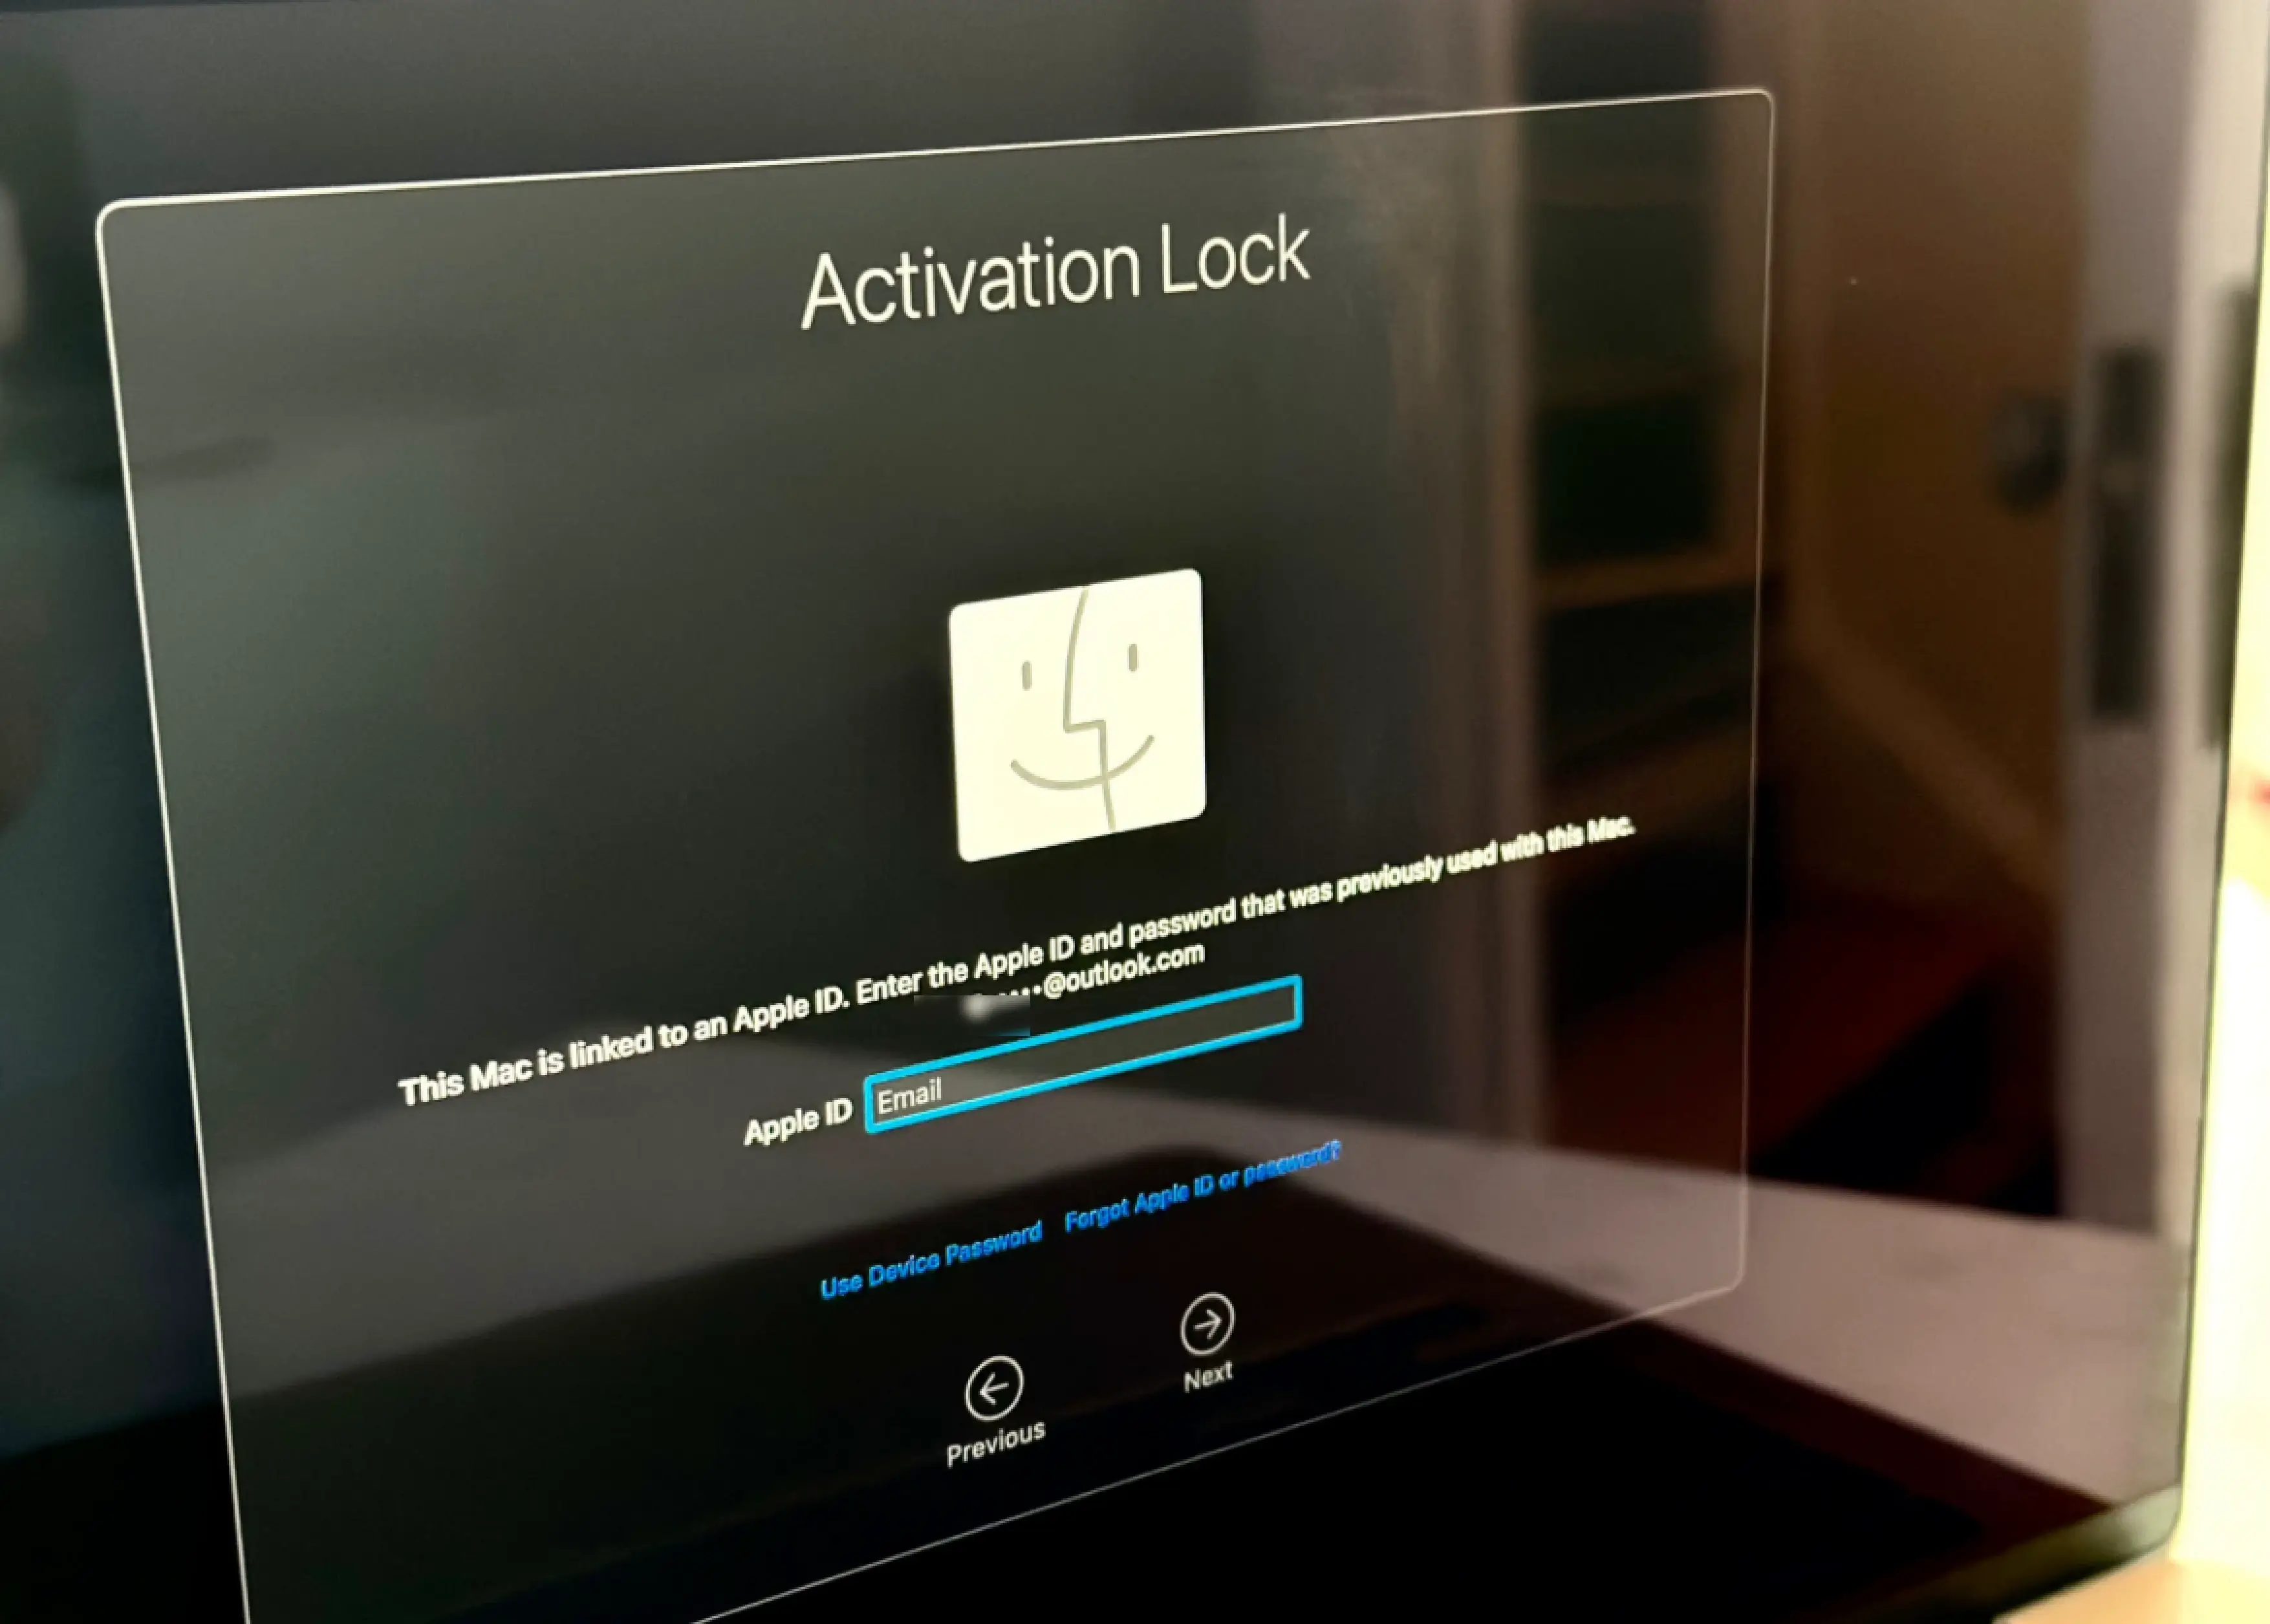 Activation Lock screen displayed after Erase and after attempt to contact Apple Servers upon start up. 

Source: x.com @RDKLInc